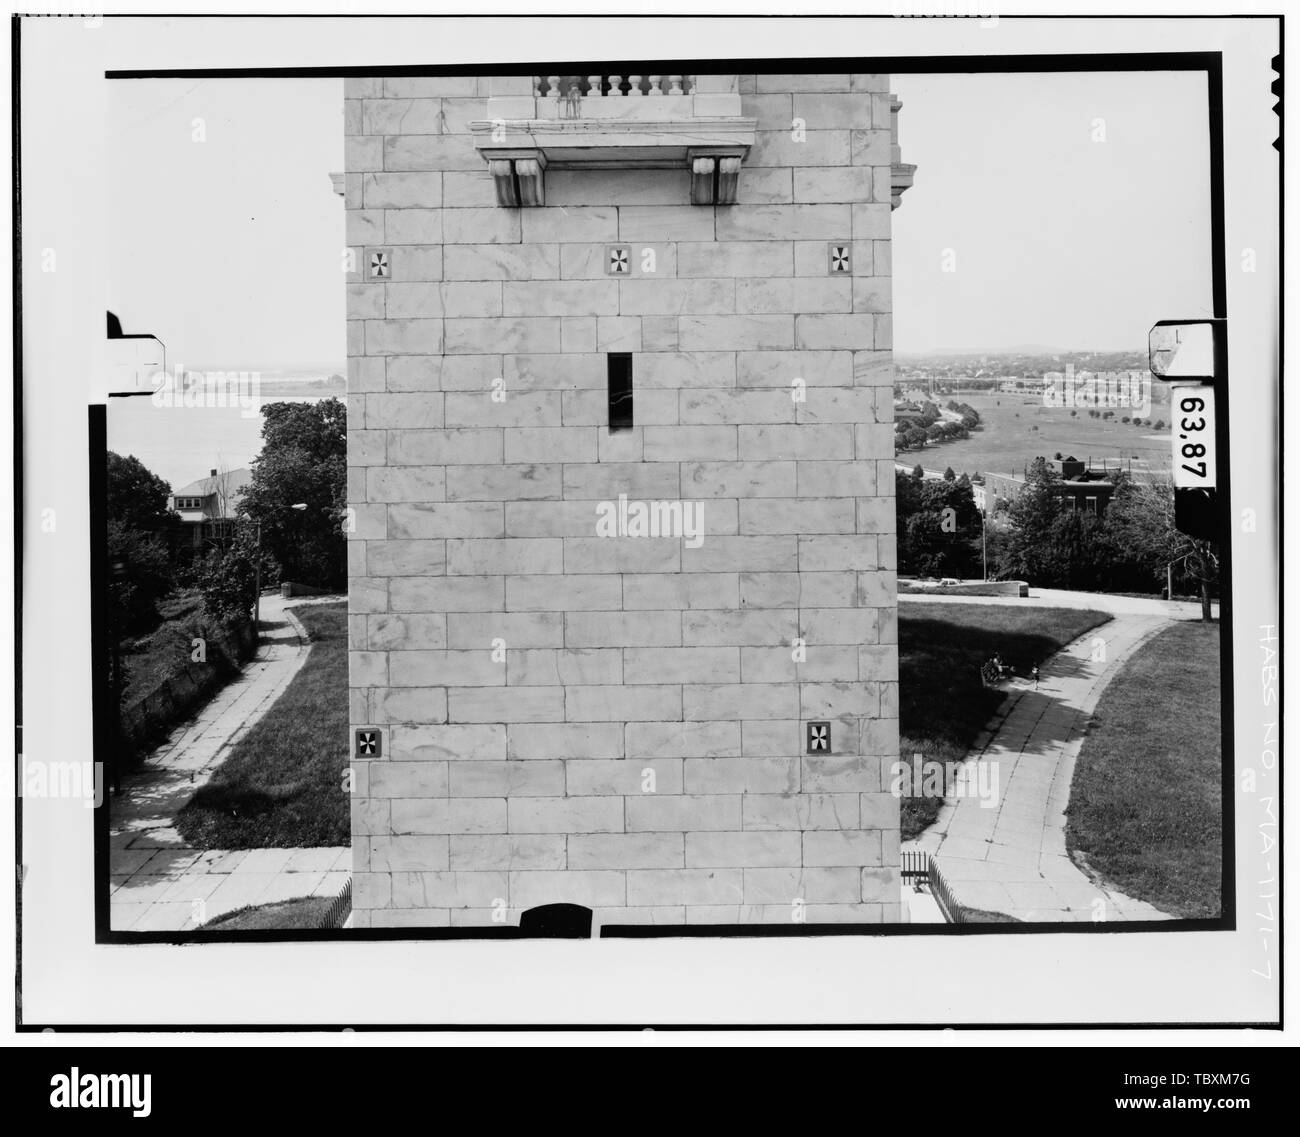 NORTH ELEVATION, LEVEL 2 Copy photograph of photogrammetric plate LCHABSGS11D1981N2R.  Dorchester Heights Monument, Thomas Park, Boston, Suffolk County, MA Peabody and Stearns Washington, George Burns, John A, field team Lawrence, Jeanne C, field team Alderson, Caroline R, field team Cronenberger, Richard J, project manager Graham, William J, field team Marsh, David T, field team Lowe, Jet, photographer Dennett, Muessig and Associates, Limited, photographer Taylor, Douglas R, delineator Schiller, Angela J, delineator Trumbull, Rebecca, delineator Stock Photo